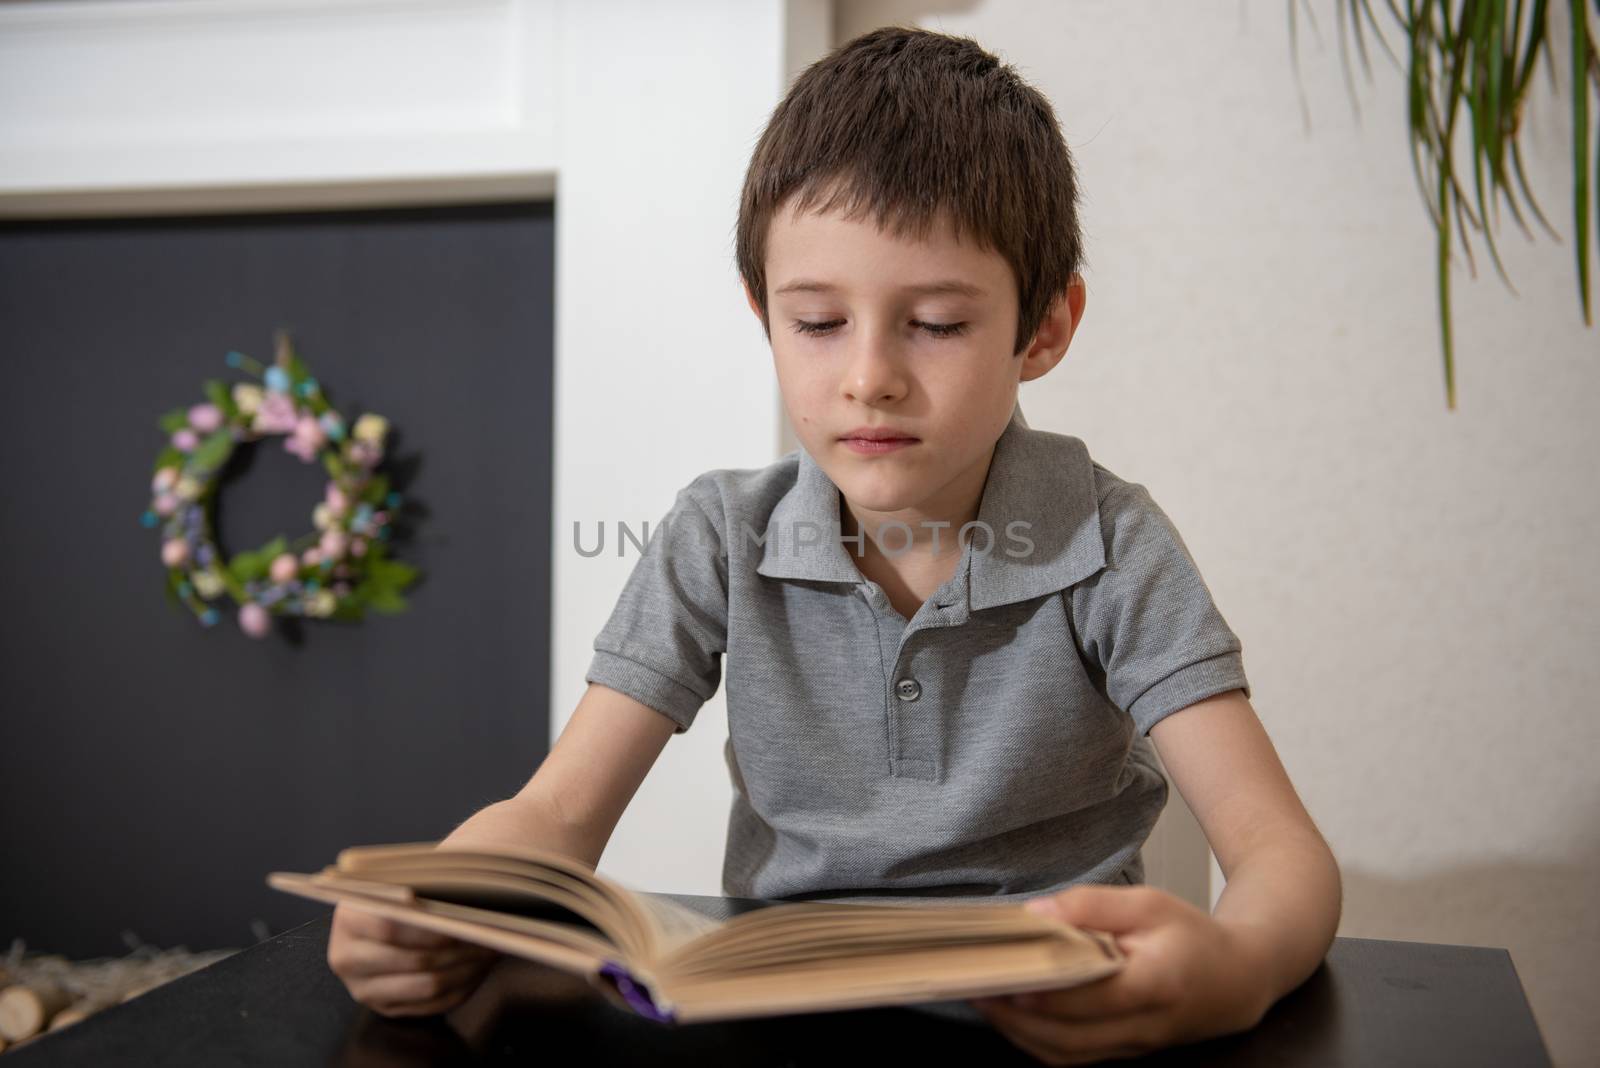 A schoolboy without expressed interest reads a book by marynkin